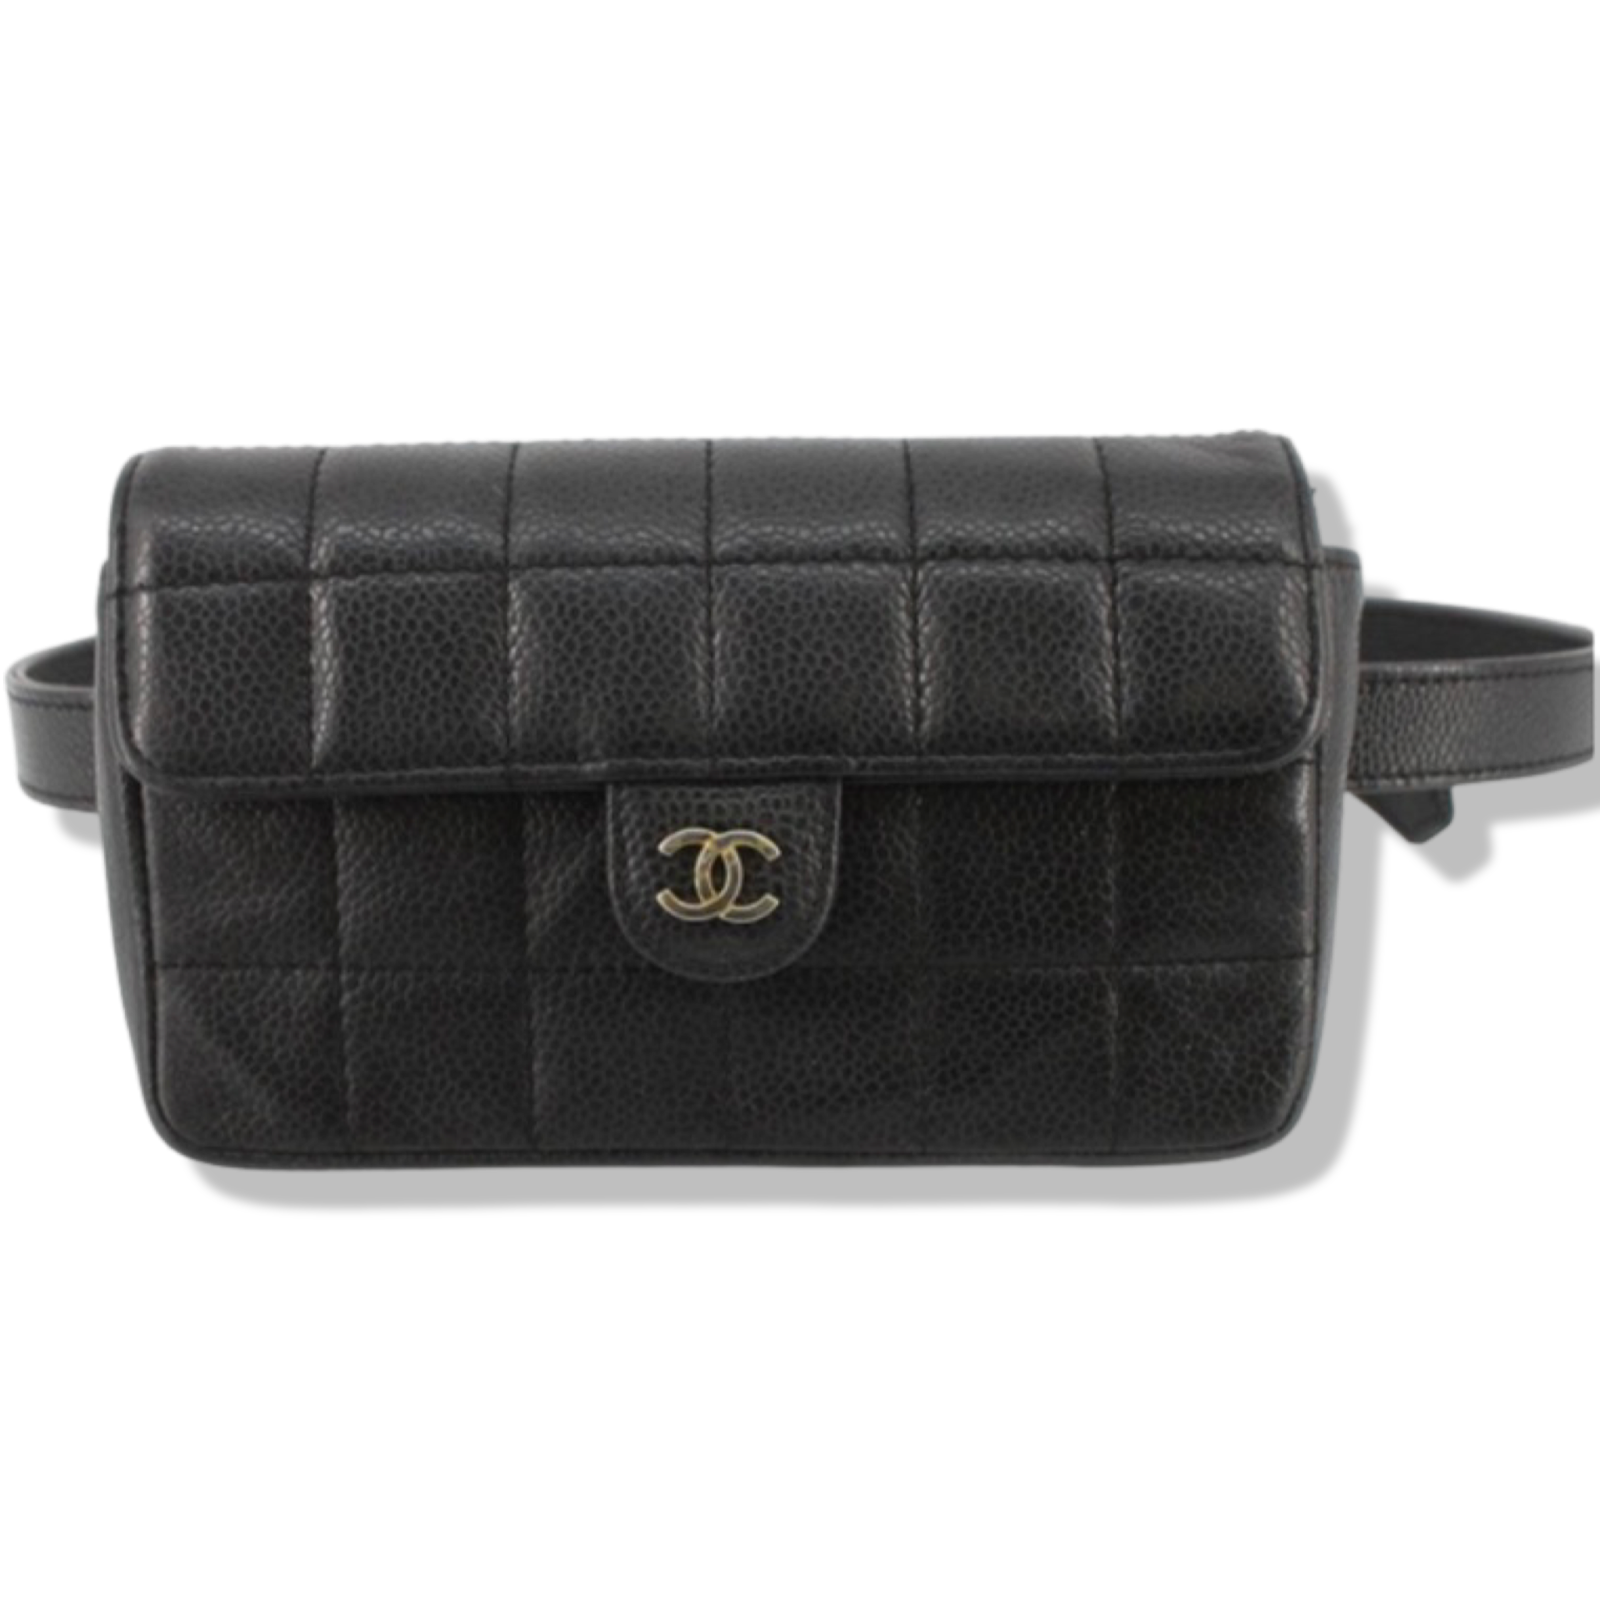 Pre-Owned & Vintage GUCCI Belt Bags for Women